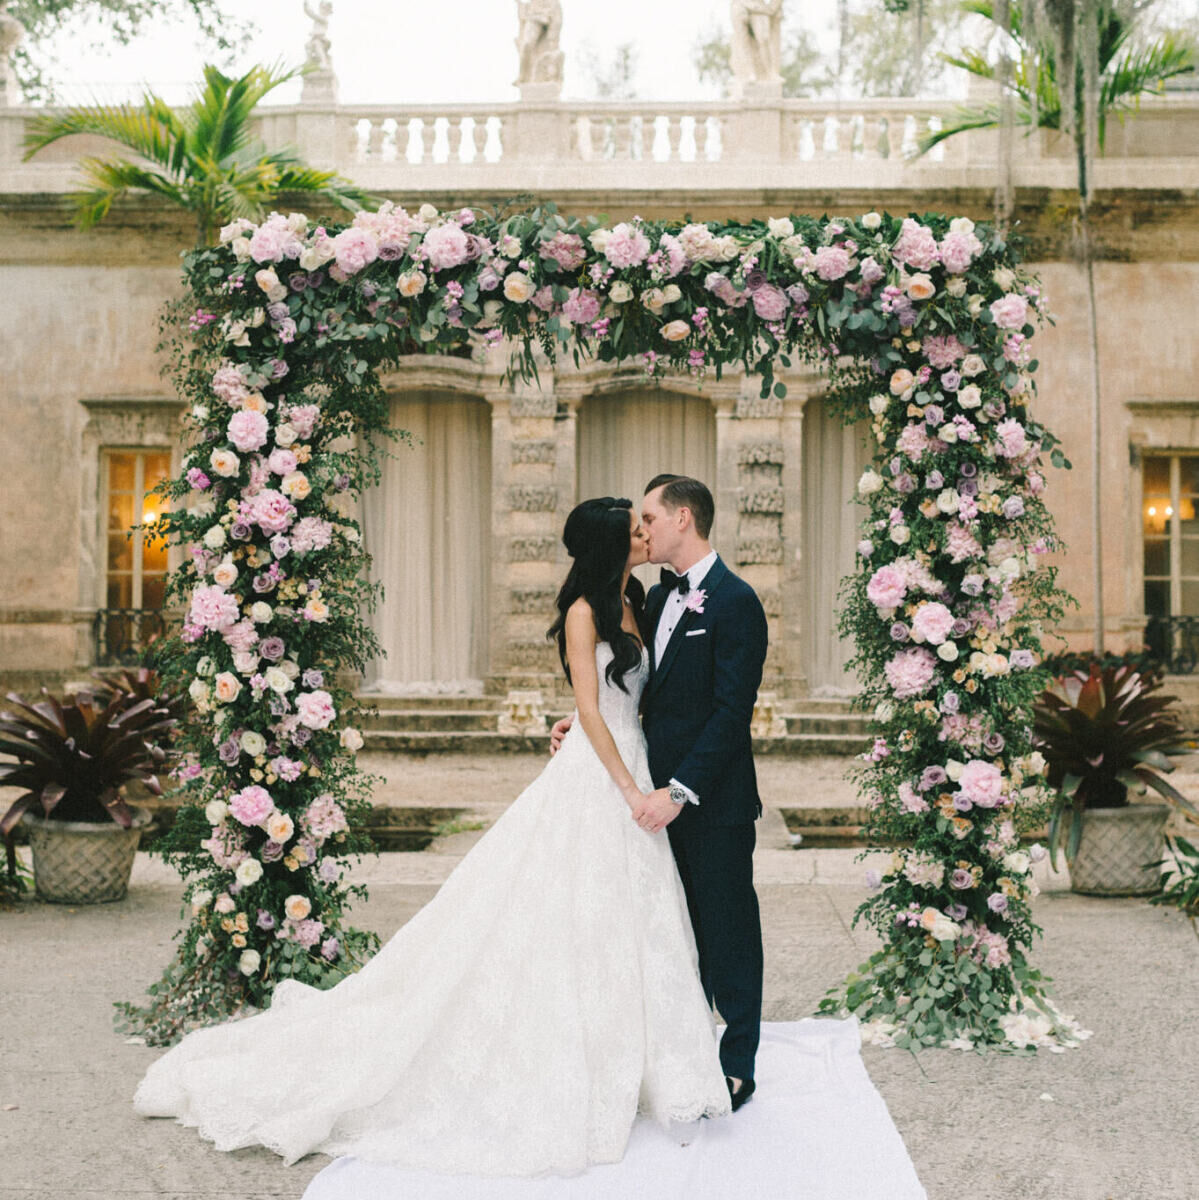 Image of Bride and groom posing for photos in front of hydrangeas